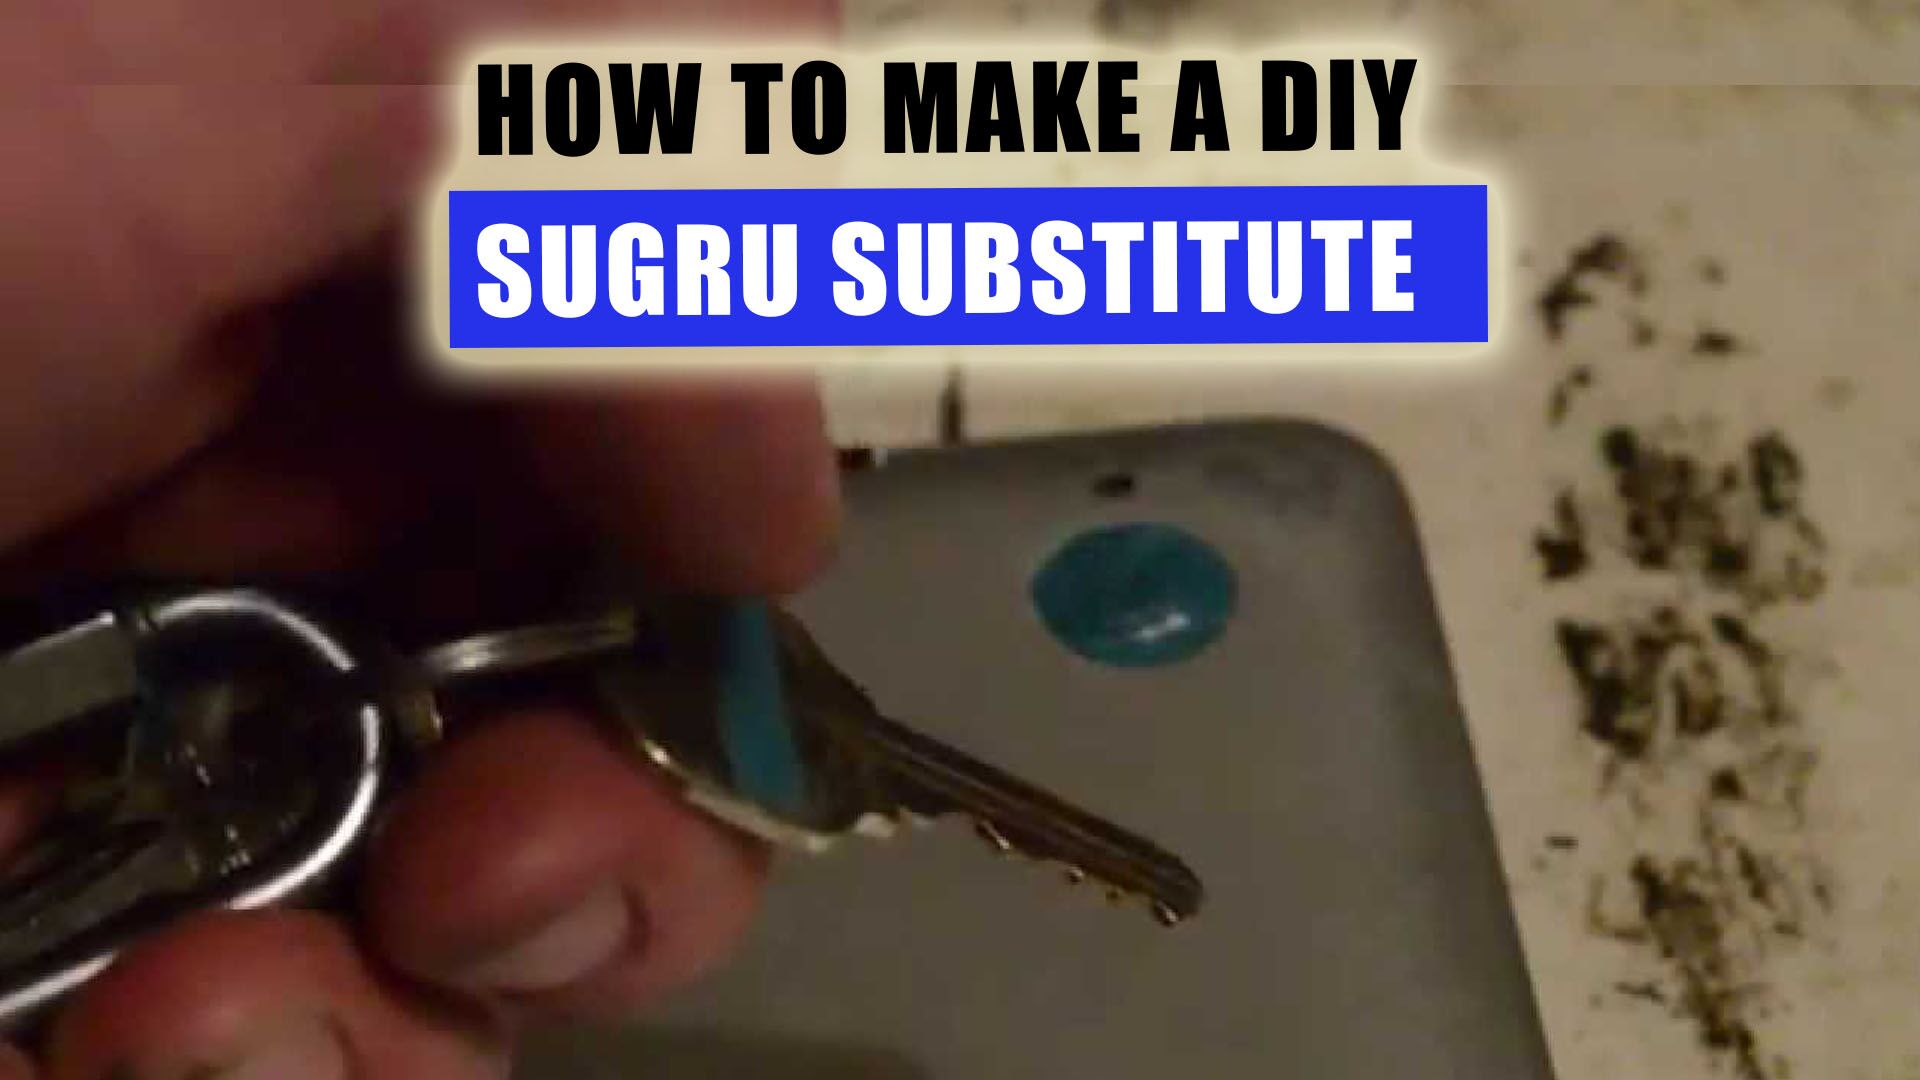 How to Make a DIY Sugru Substitute